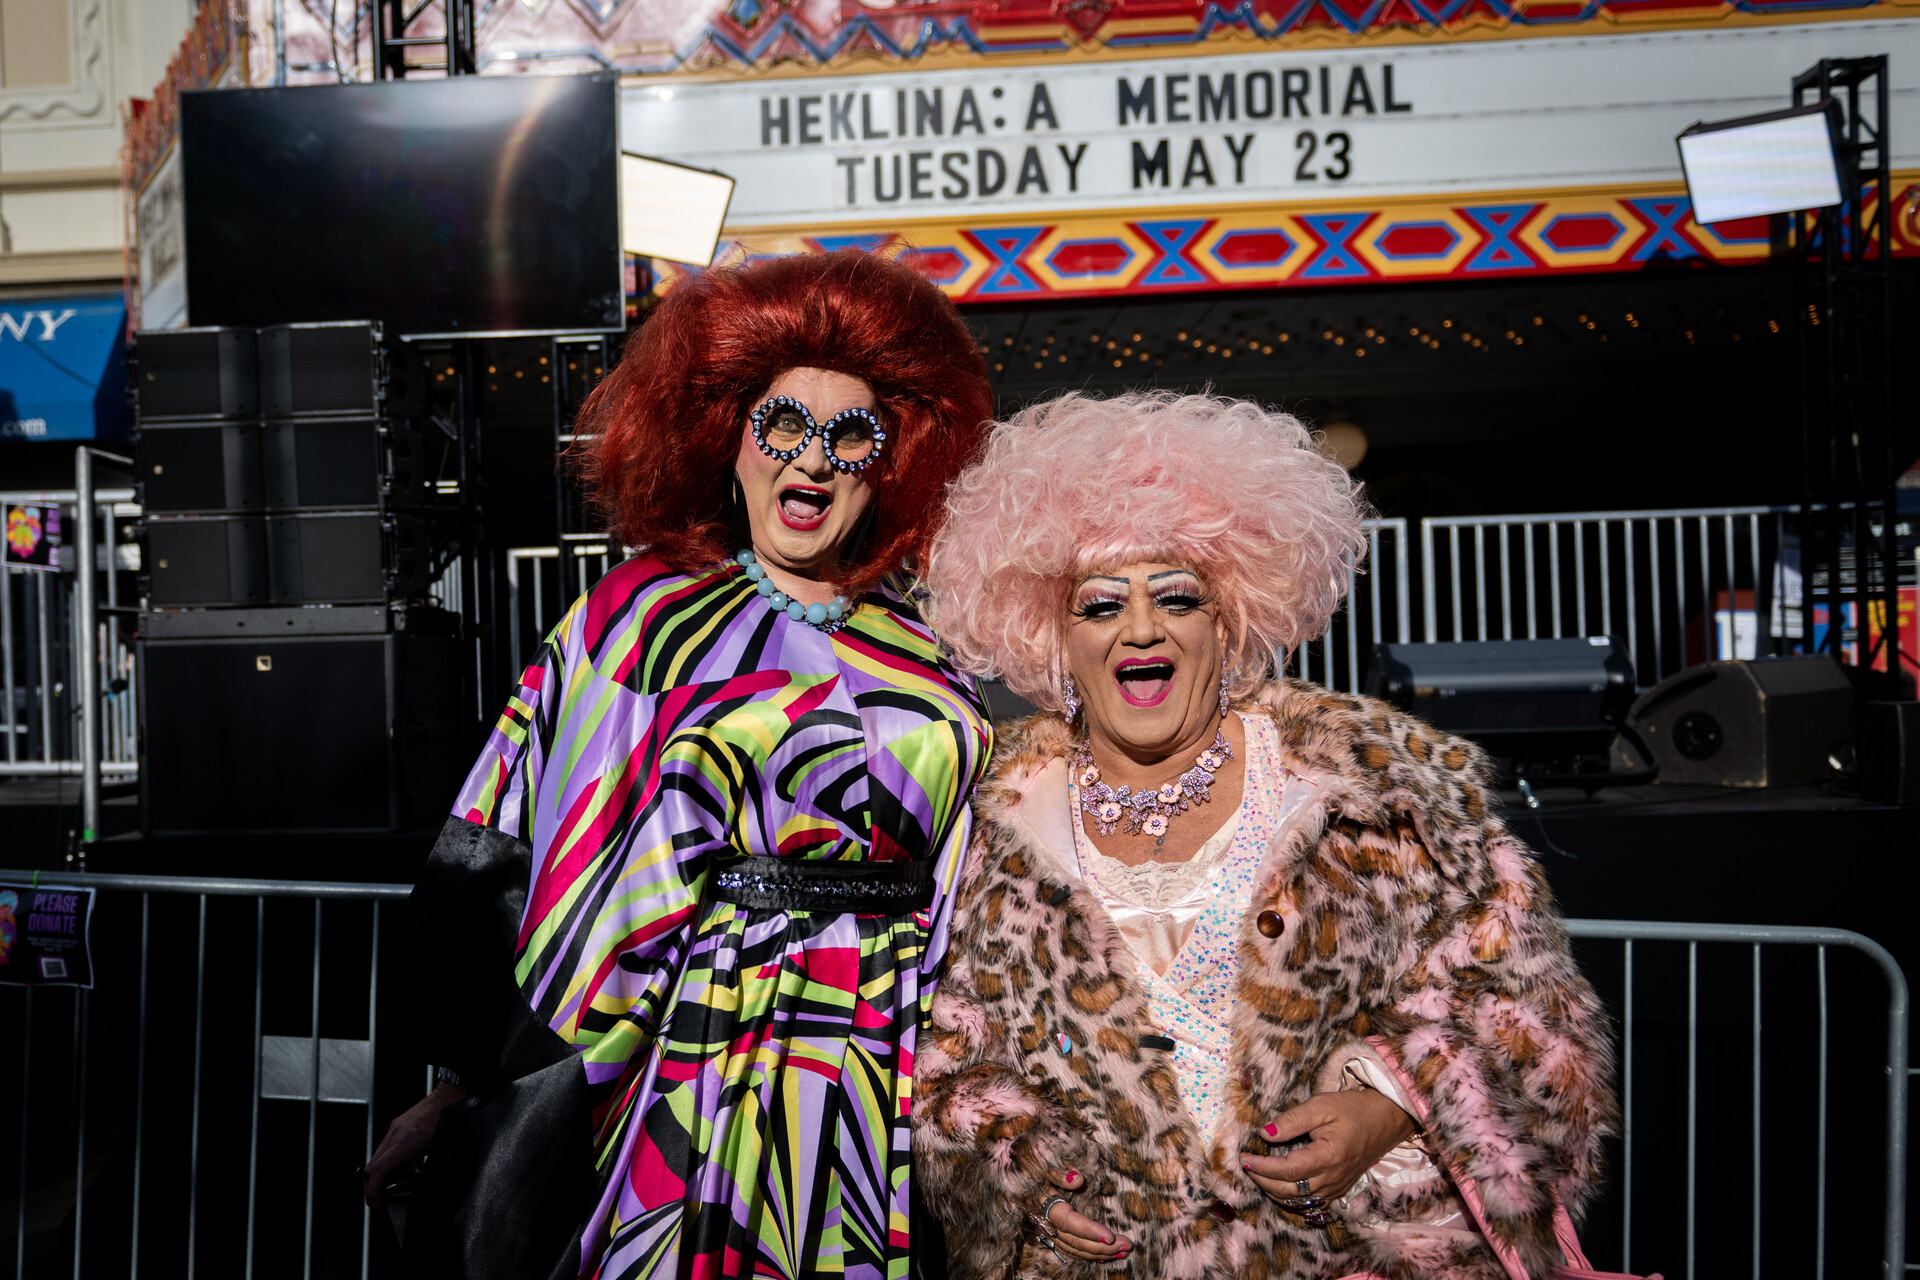 Two drag performers, dressed up in very colorful wigs and puffy dresses, smile at the camera.